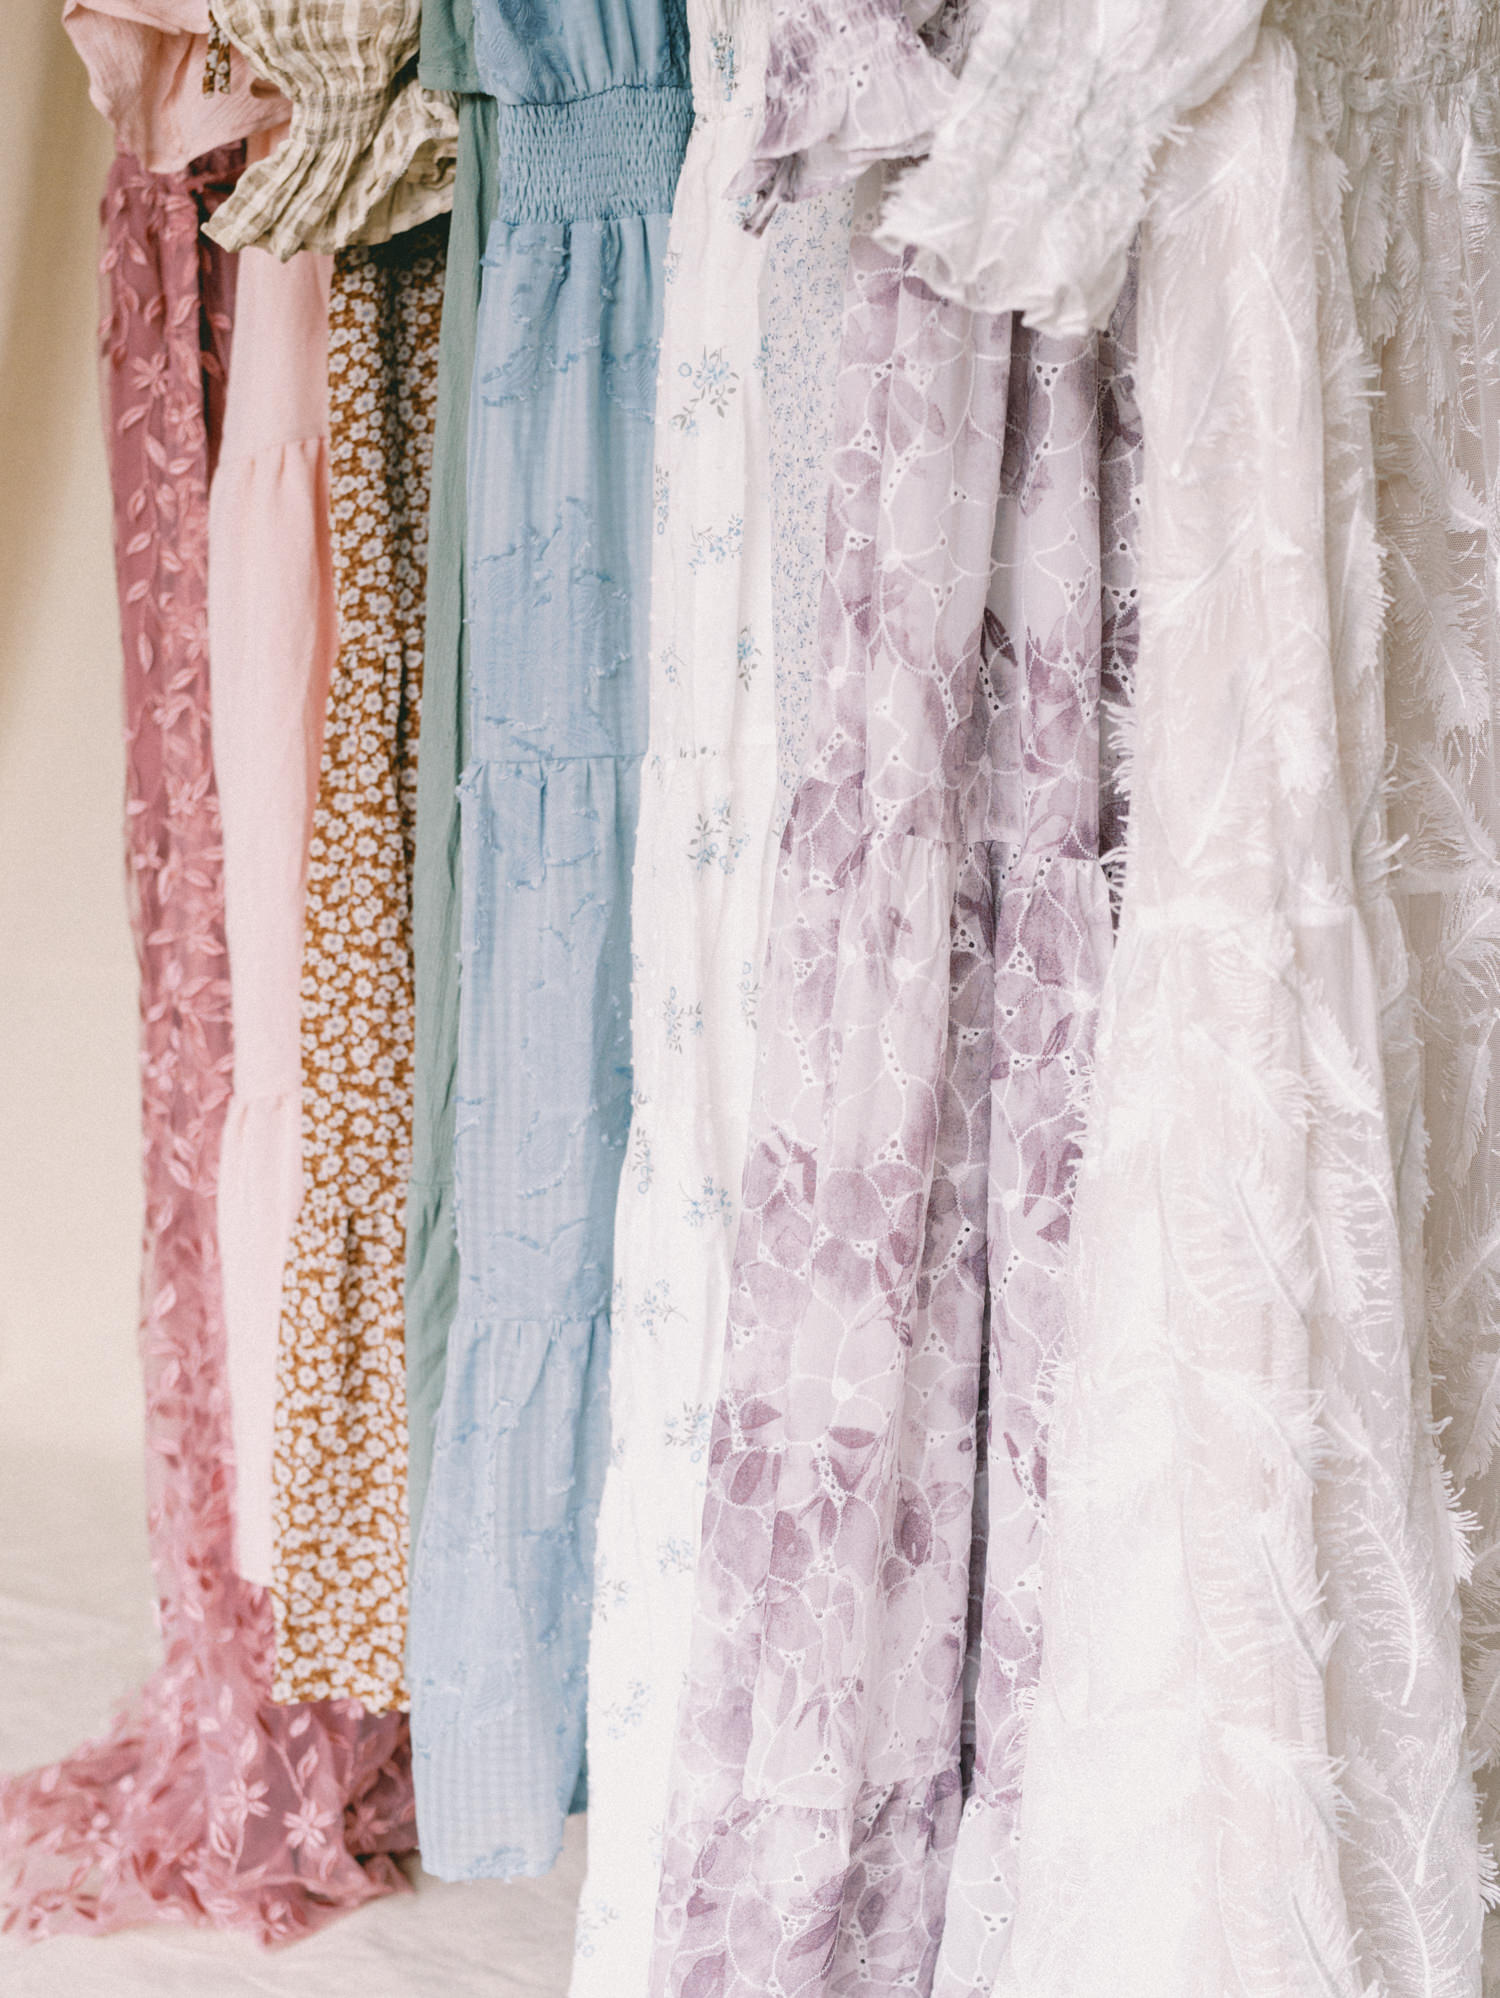 dresses hanging up from the client wardrobe of toronto maternity photographer emily anderson